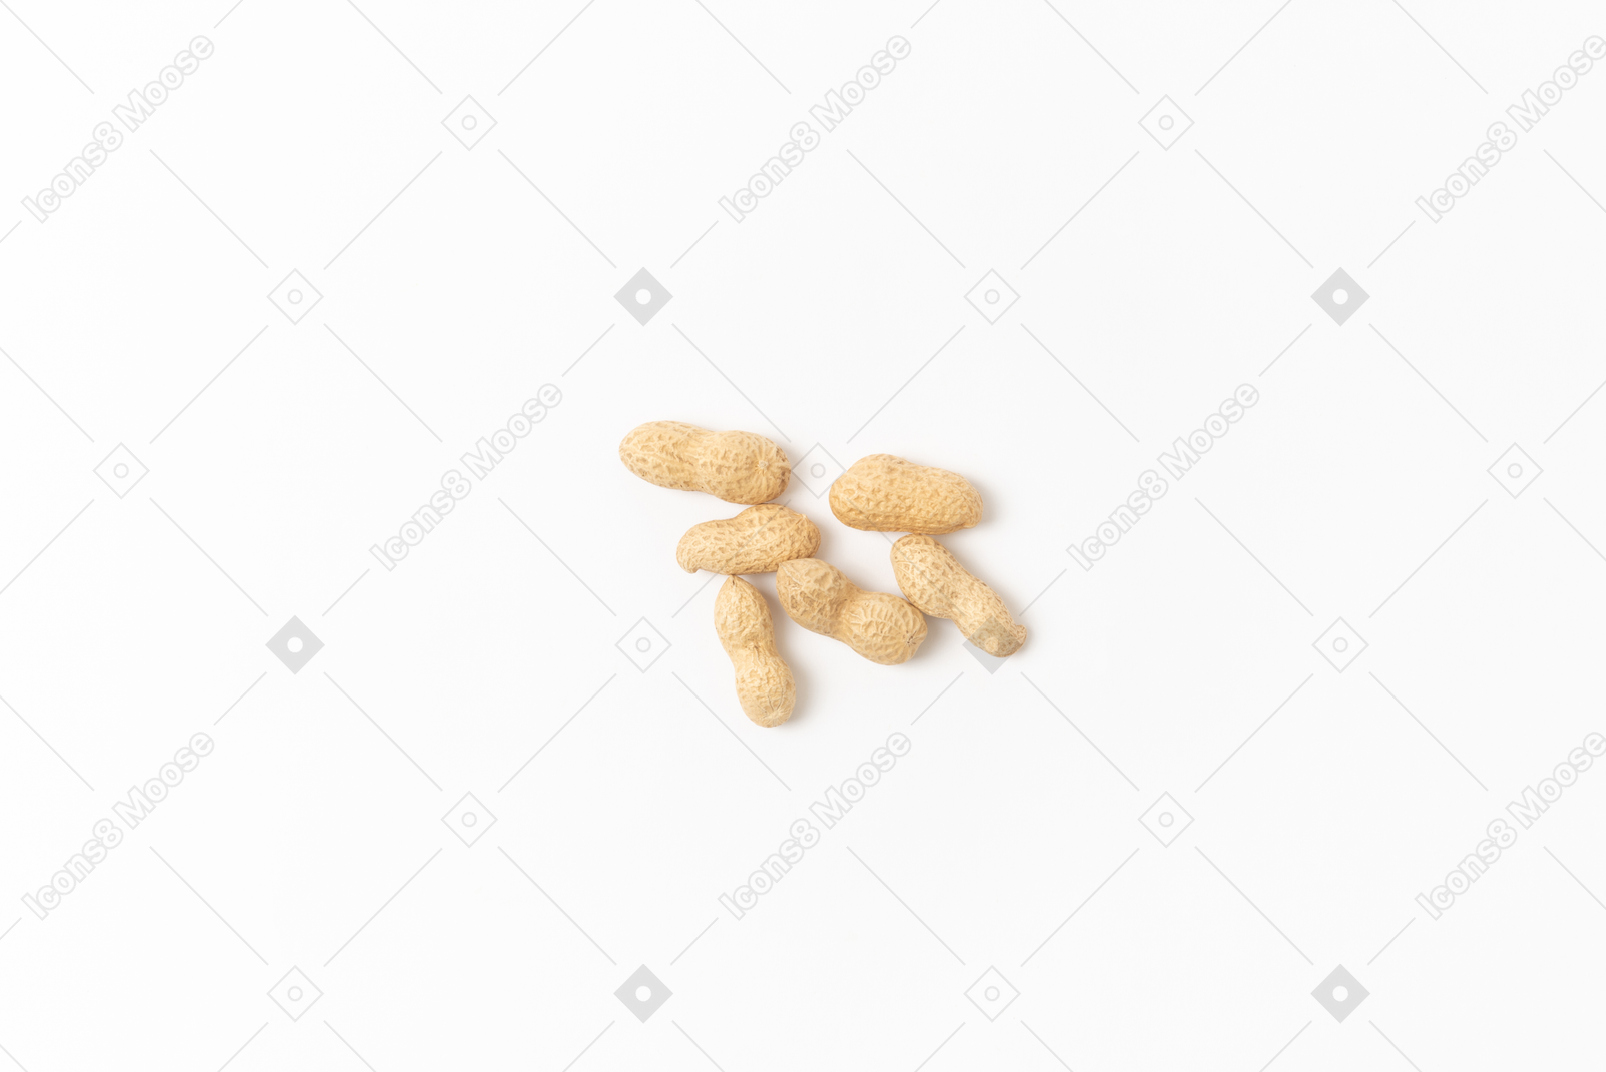 Peanuts are not nuts, they belong to the legume family